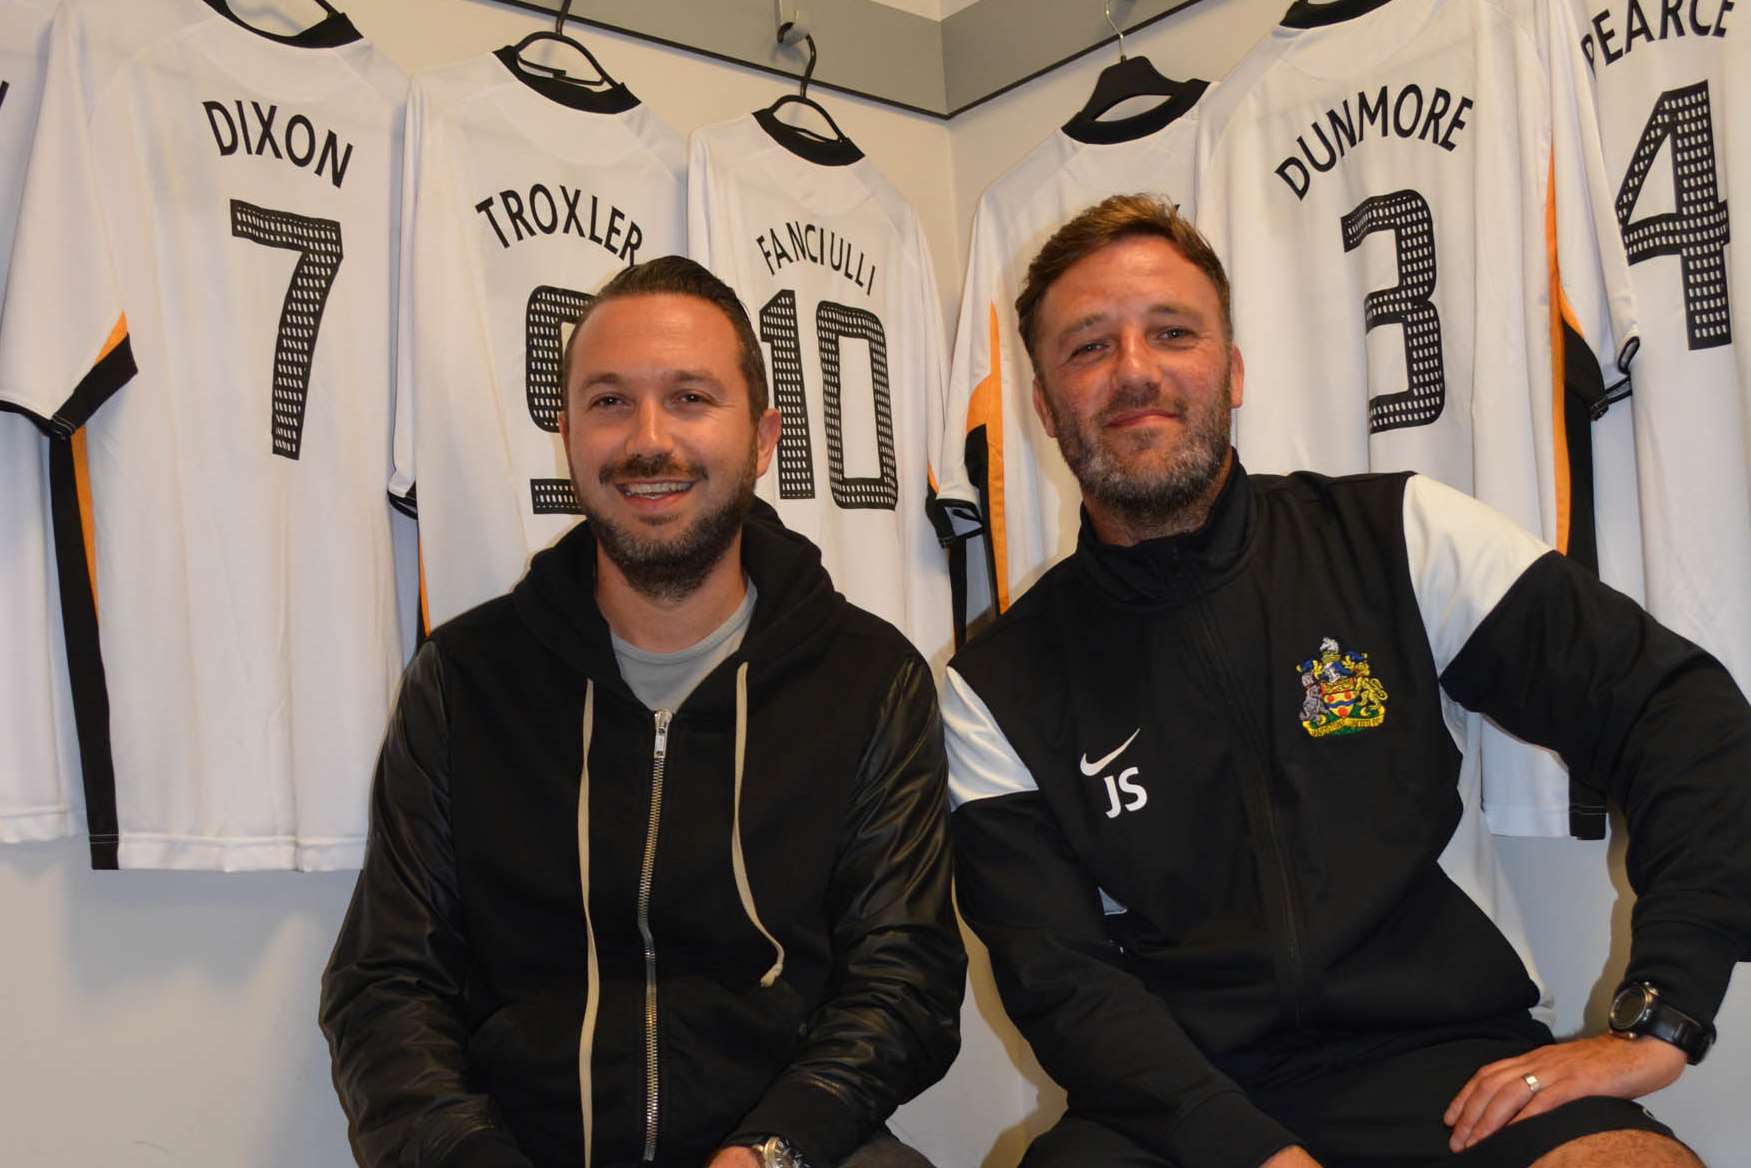 Organiser Nic Fanciulli with the manager of Maidstone United Football Club, Jay Saunders.